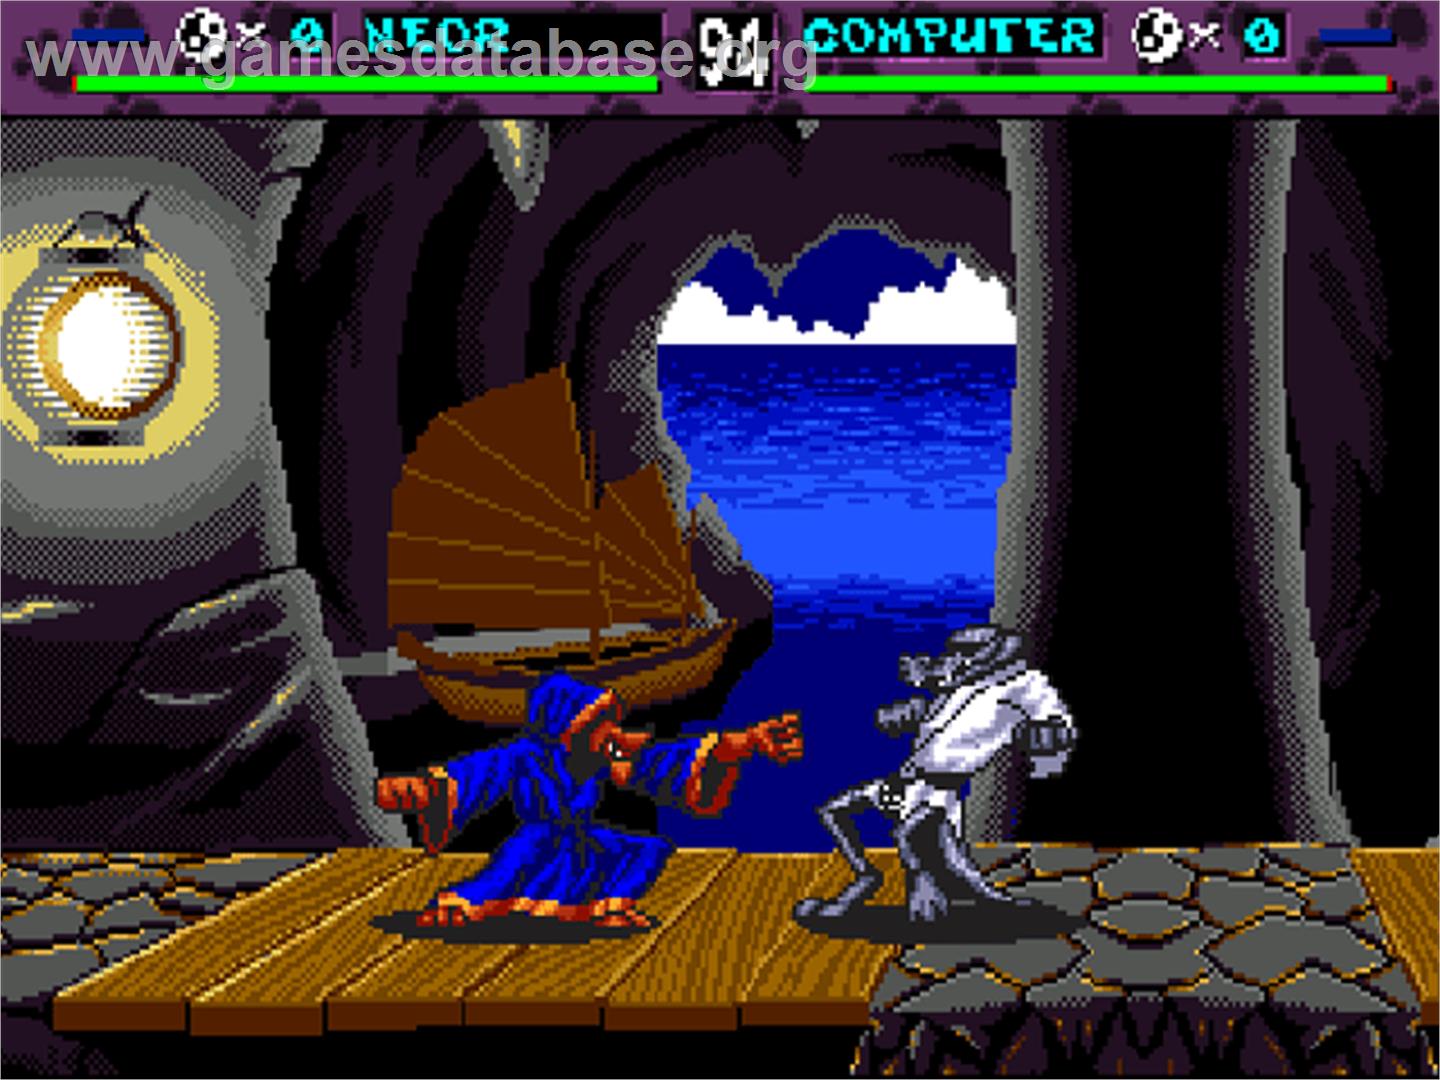 Brutal: Paws of Fury - Commodore Amiga CD32 - Artwork - In Game